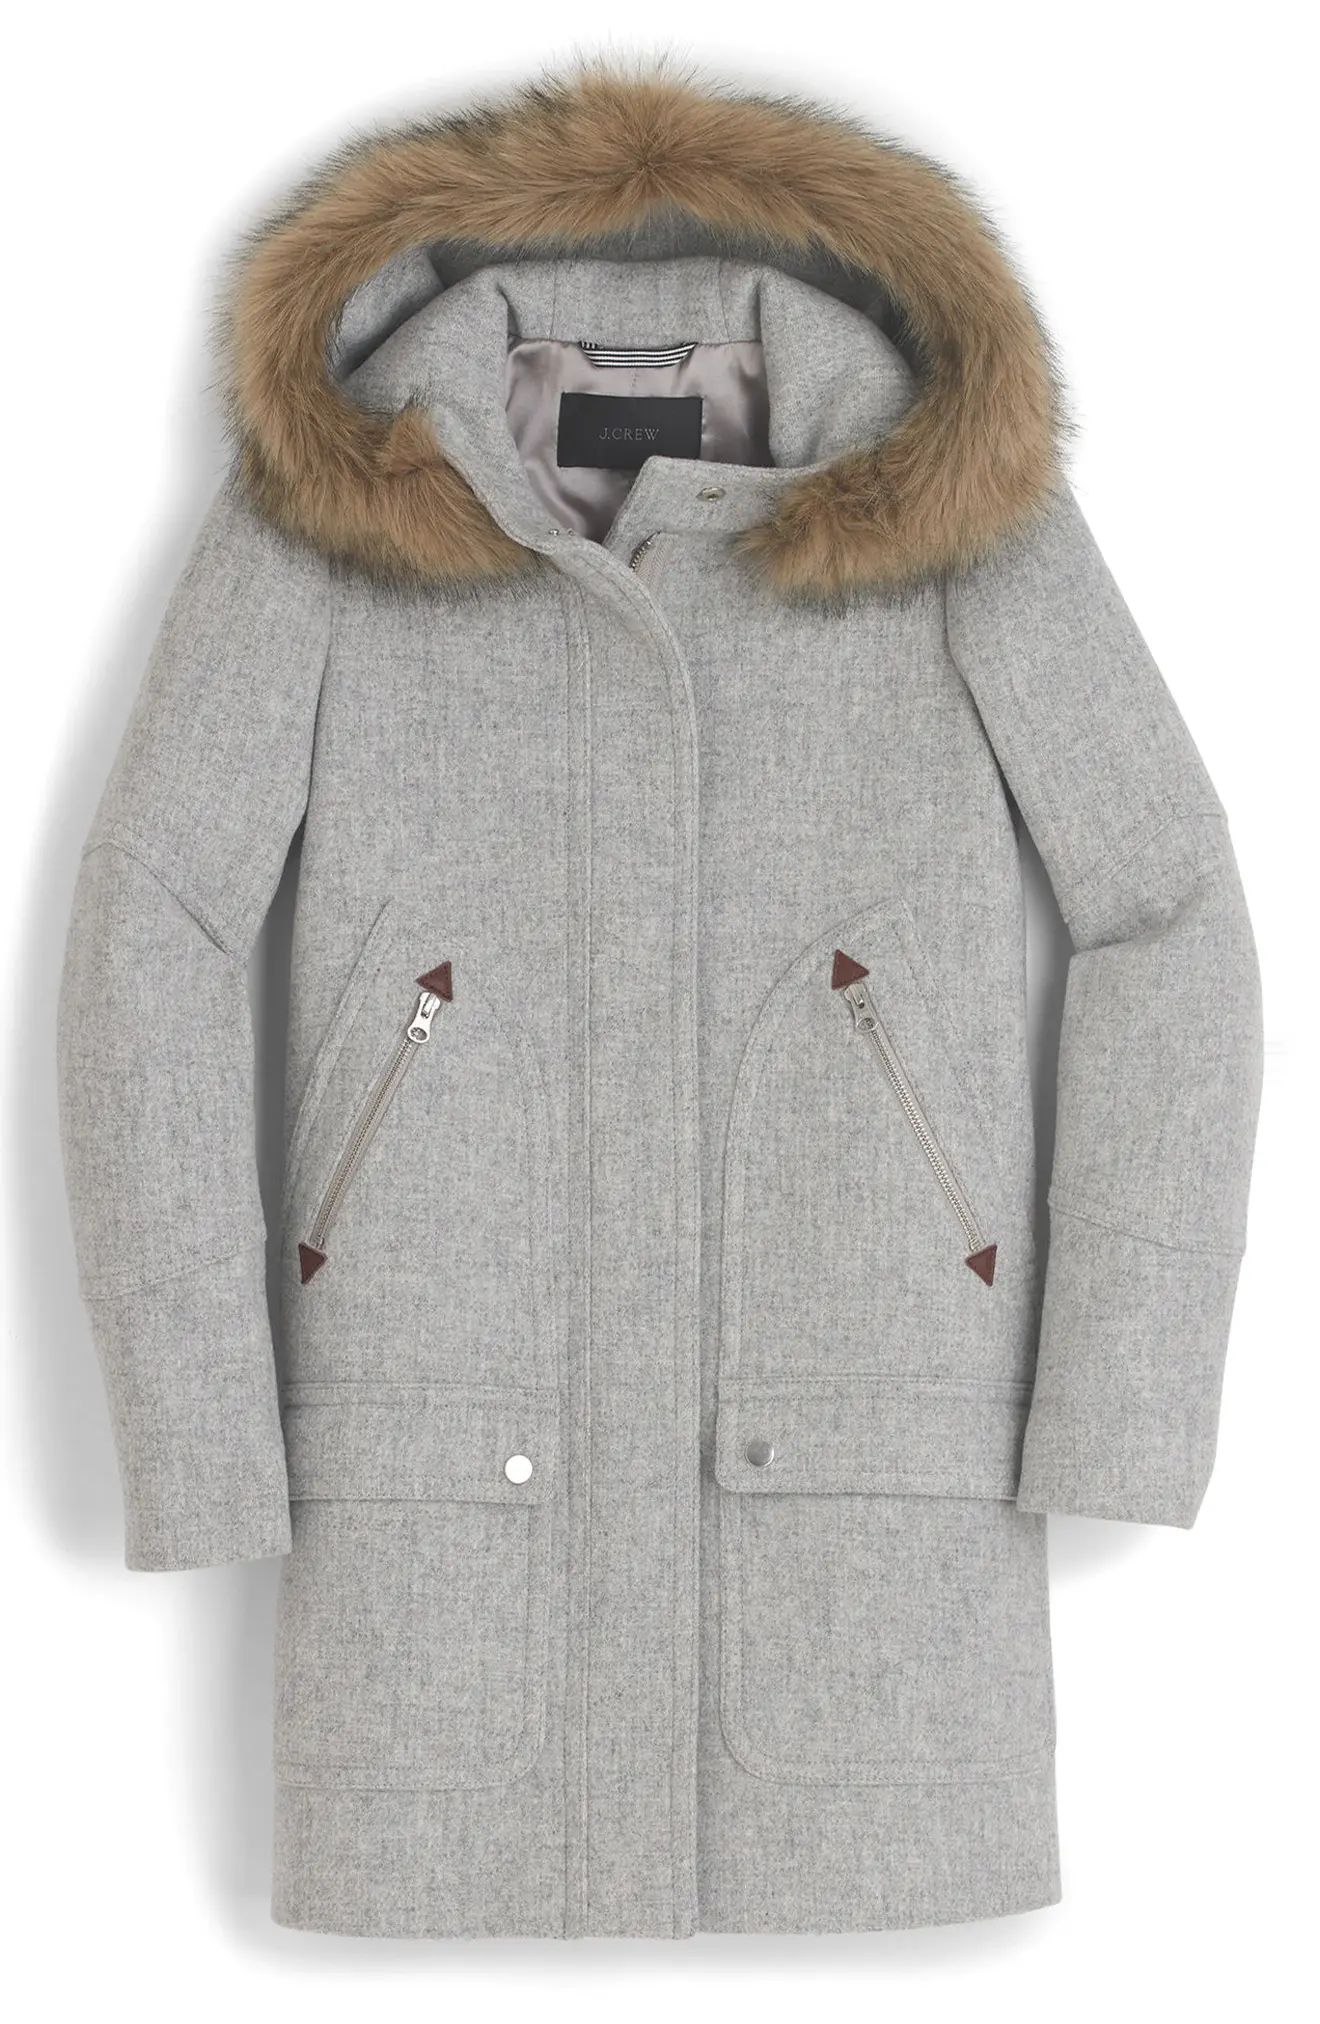 J.Crew Chateau Stadium Cloth Parka with Faux Fur | Nordstrom